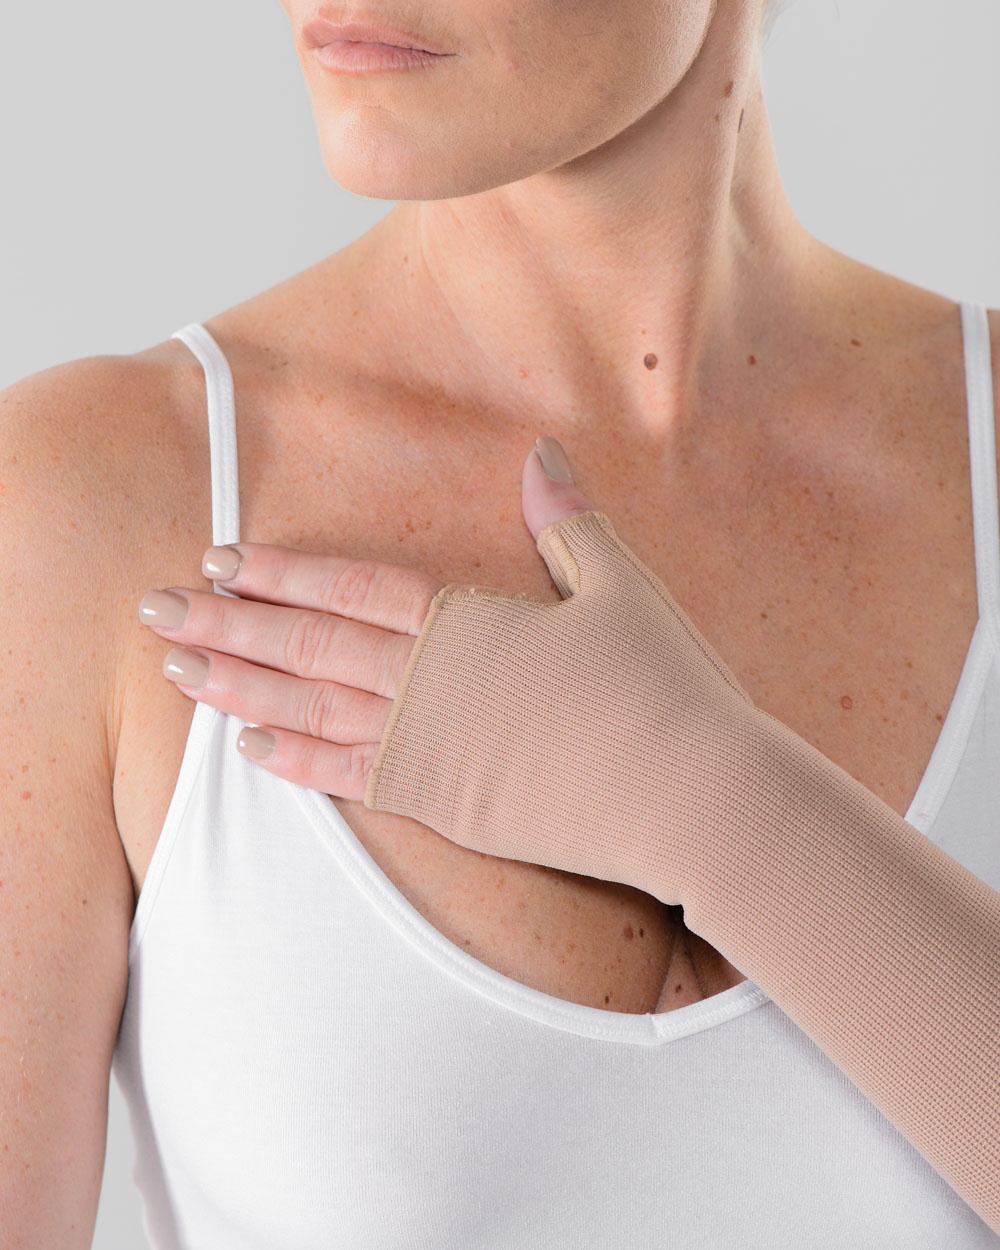 https://www.medismedical.com/wp-content/uploads/2023/04/Arm-sleeve-with-Mitten.jpg